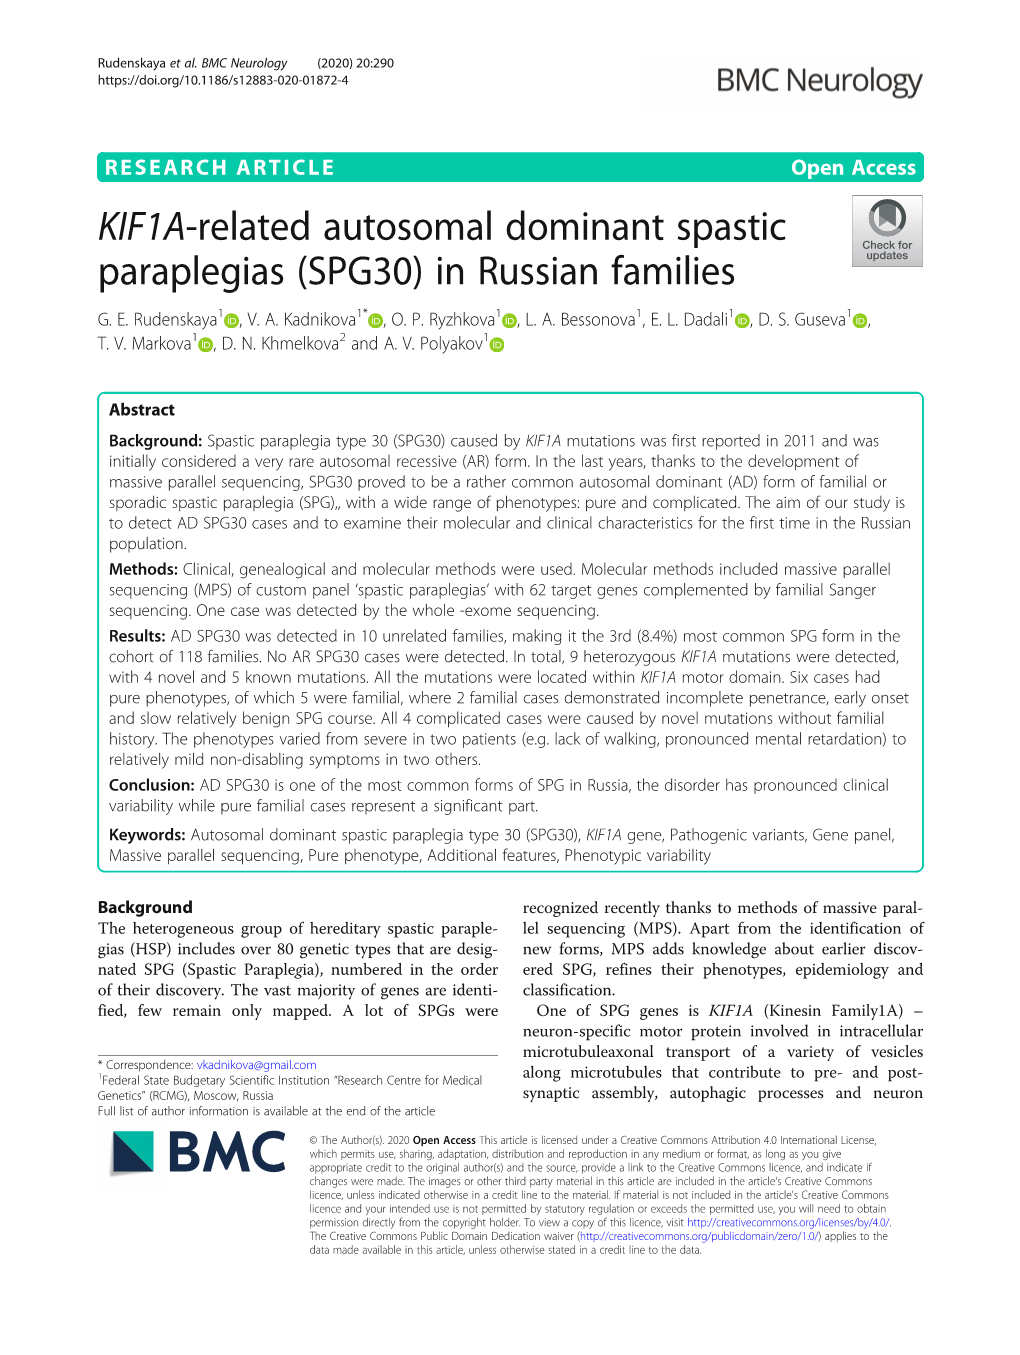 KIF1A-Related Autosomal Dominant Spastic Paraplegias (SPG30) in Russian Families G